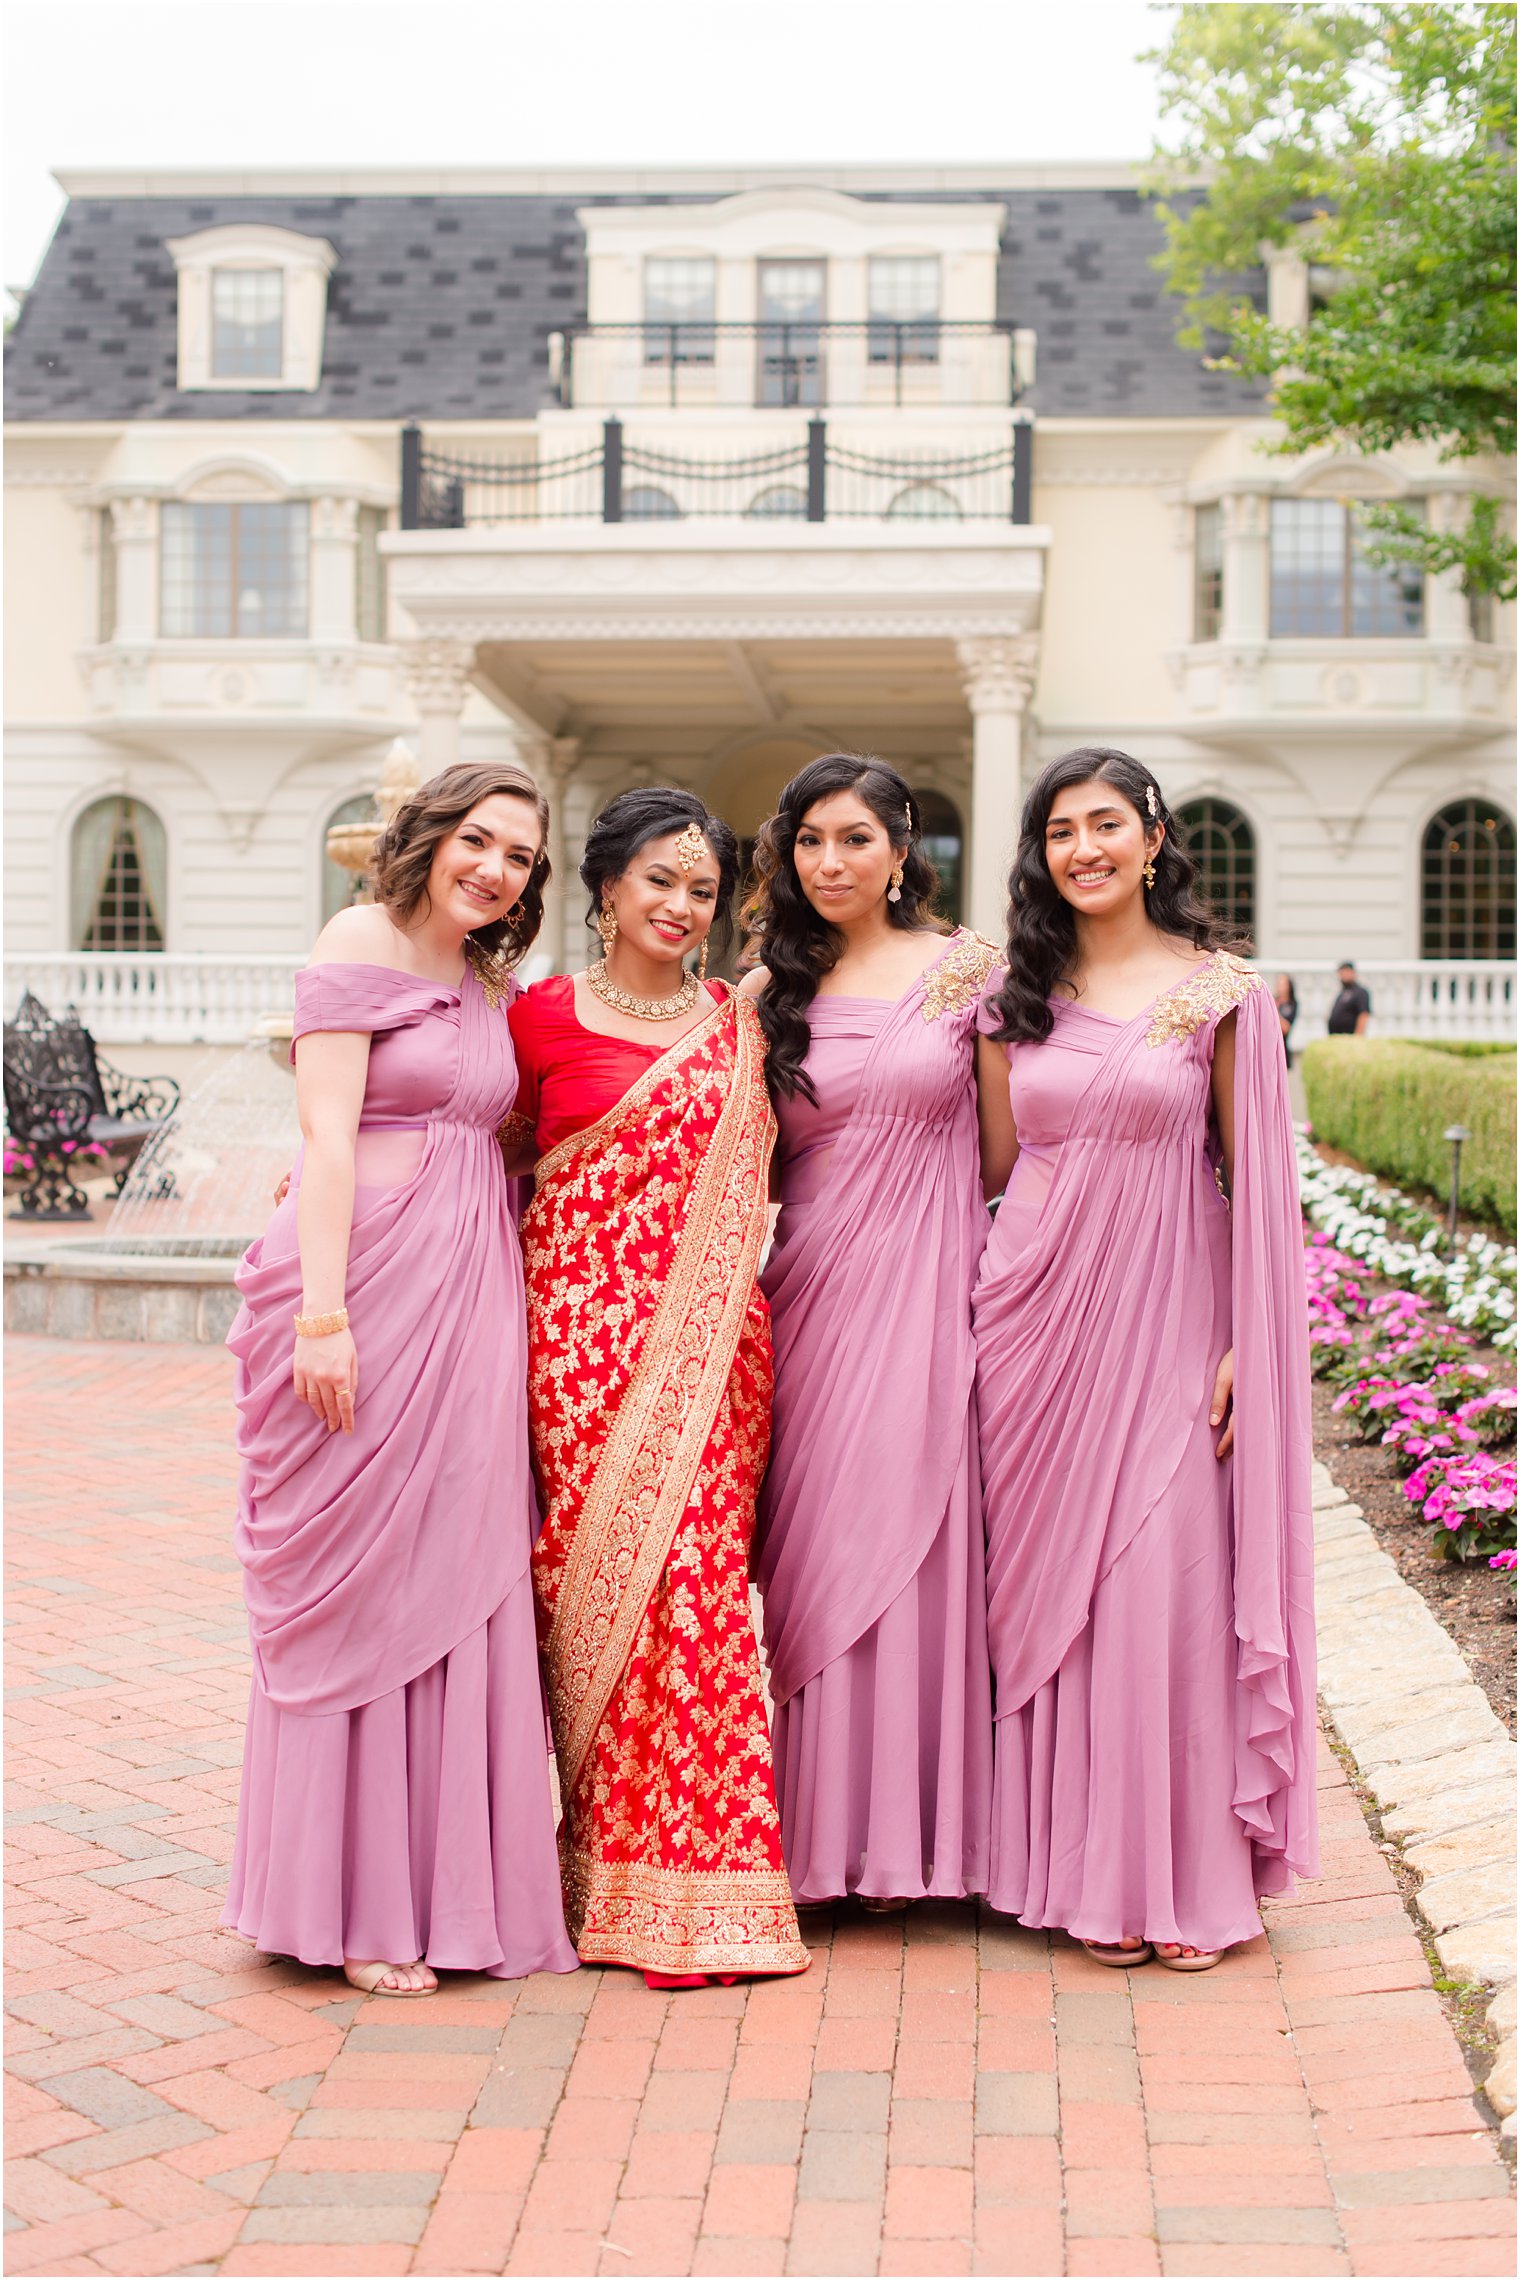 bride in red and gold sari poses with three bridesmaids in pink Hindu dresses 